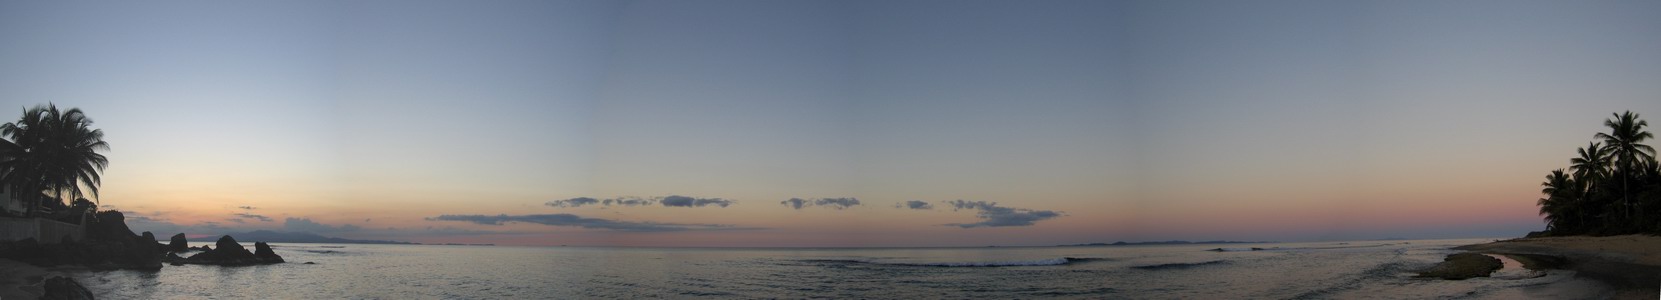 Atlantic twilight. At the horizon from left: Puerto Rico, Culebra, and St. Thomas far right at a distance.